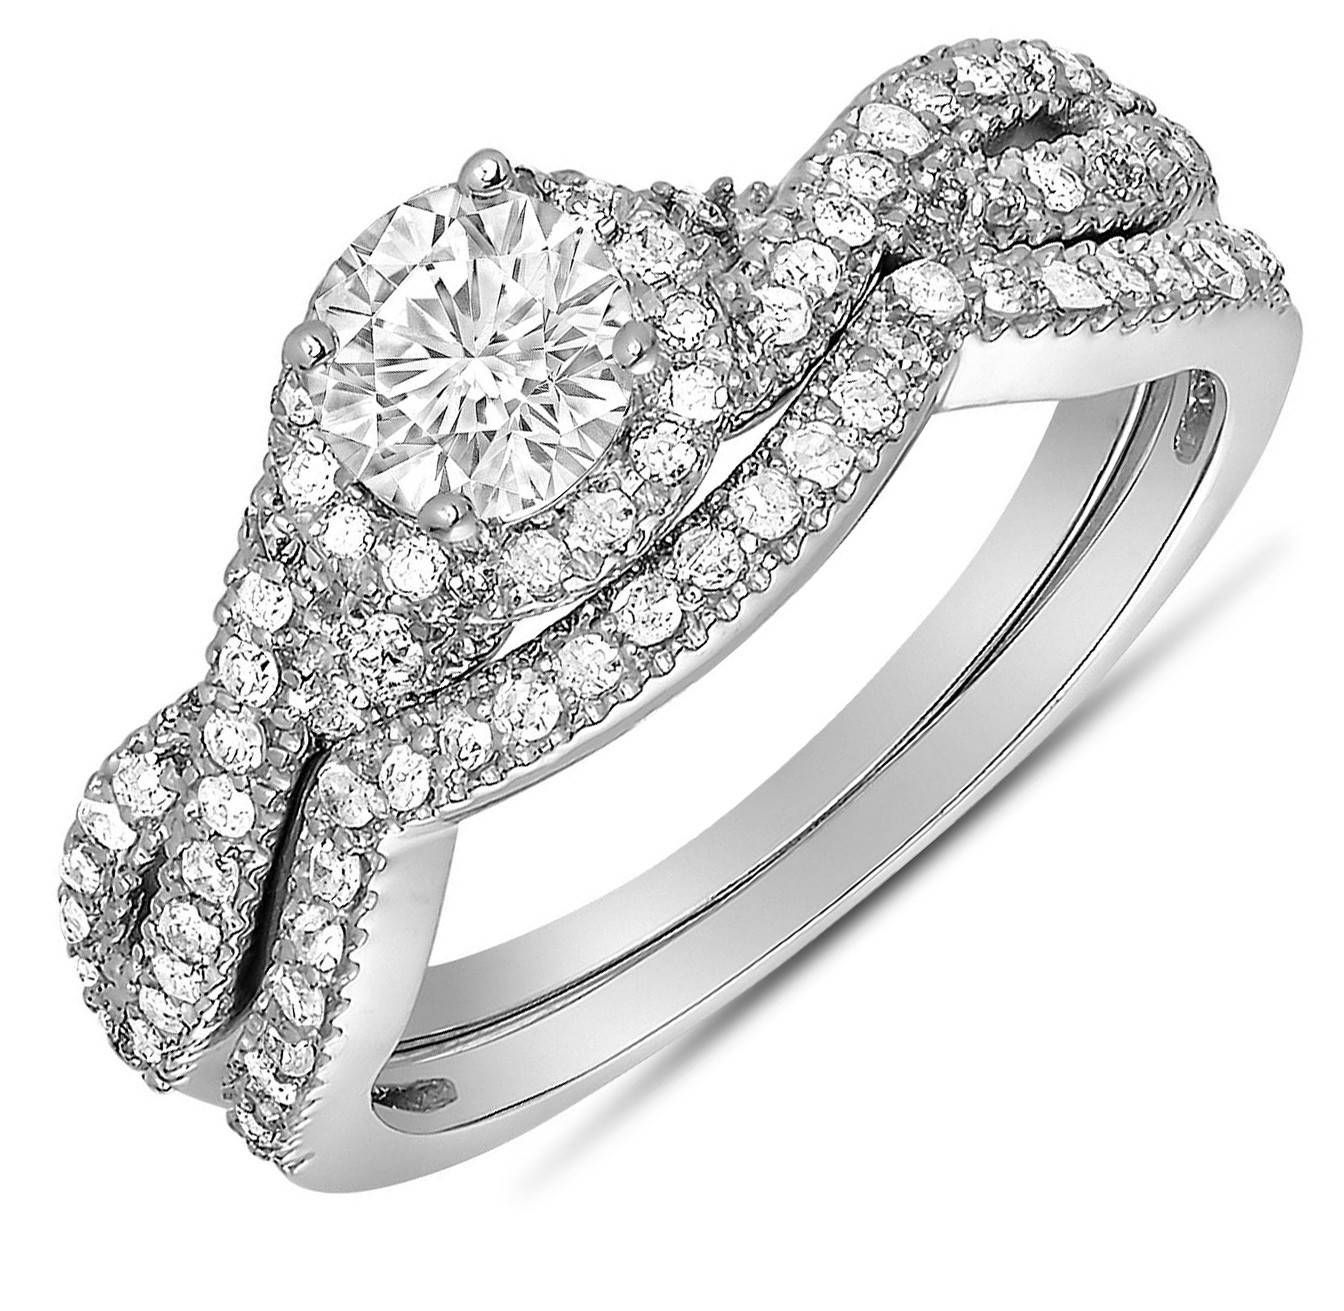 2 Carat Round Diamond Infinity Wedding Ring Set In White Gold For With Infinity Wedding Bands Sets (View 2 of 15)